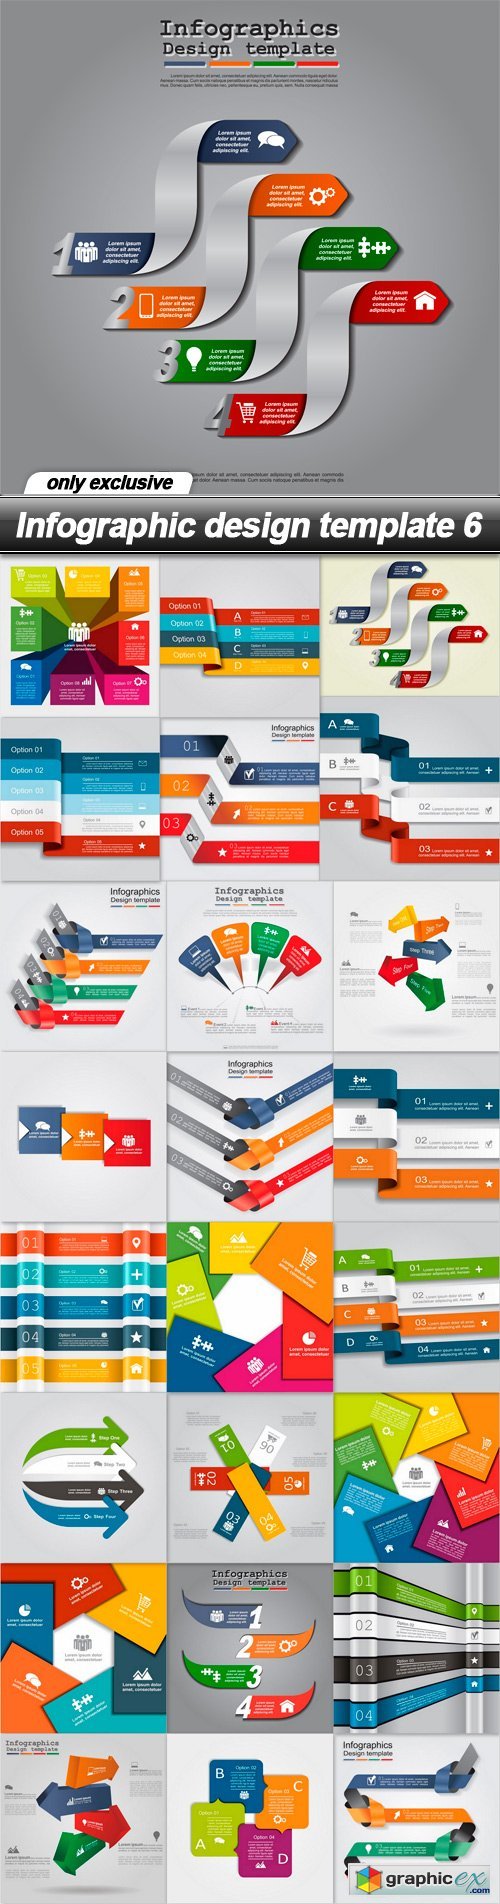 Infographic design template 6 - 25 EPS